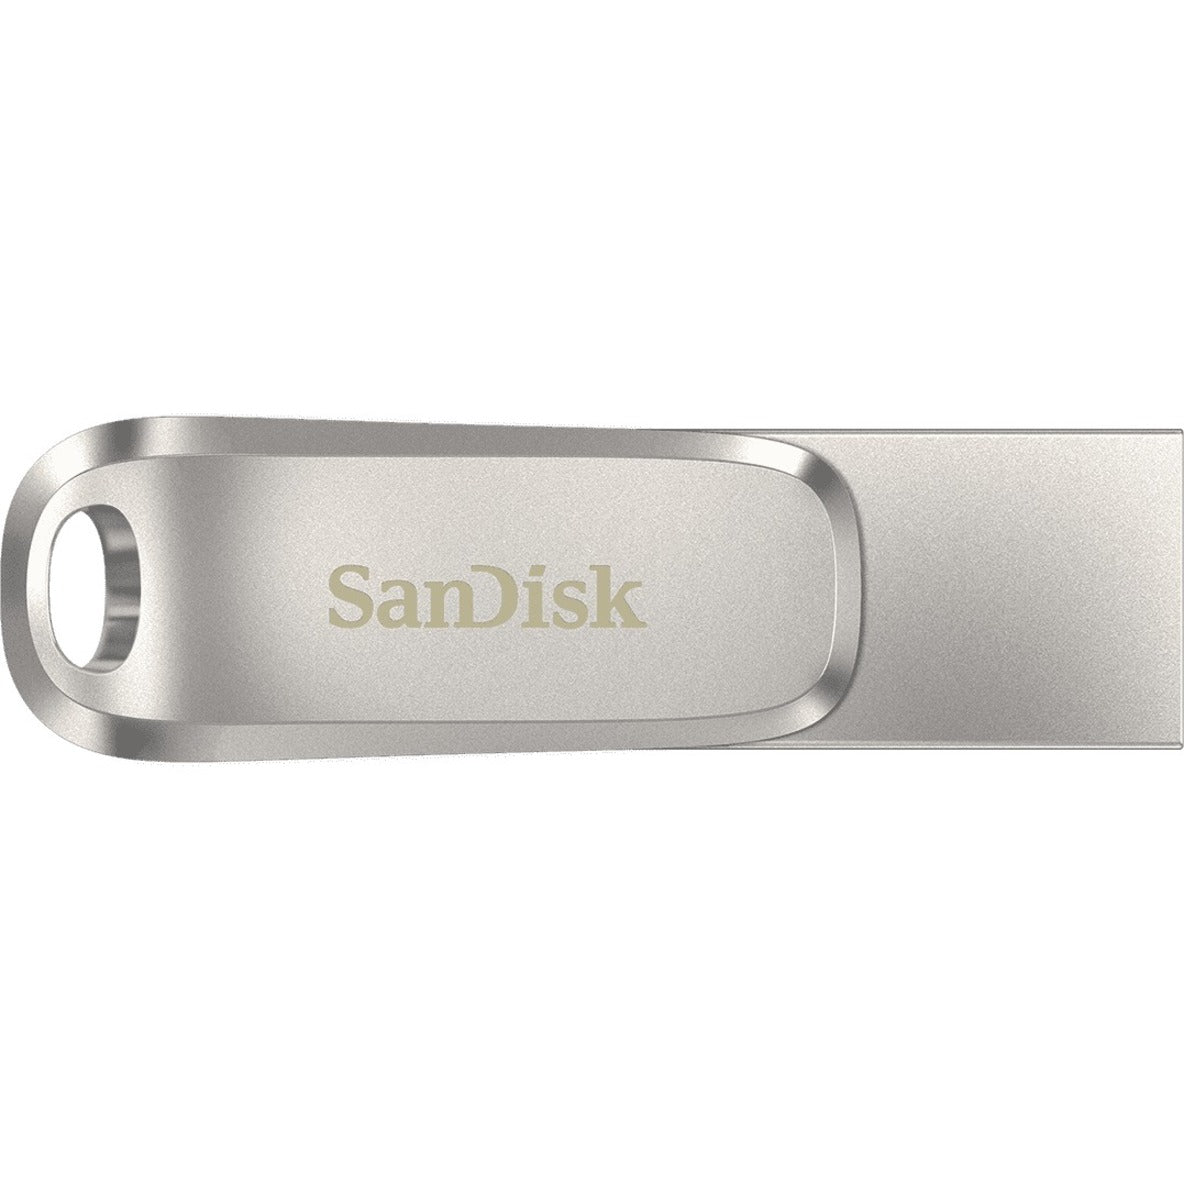 SanDisk SDDDC4-512G-A46 Ultra Dual Drive Luxe USB TYPE-C - 512GB, High-Speed Data Transfer and Storage